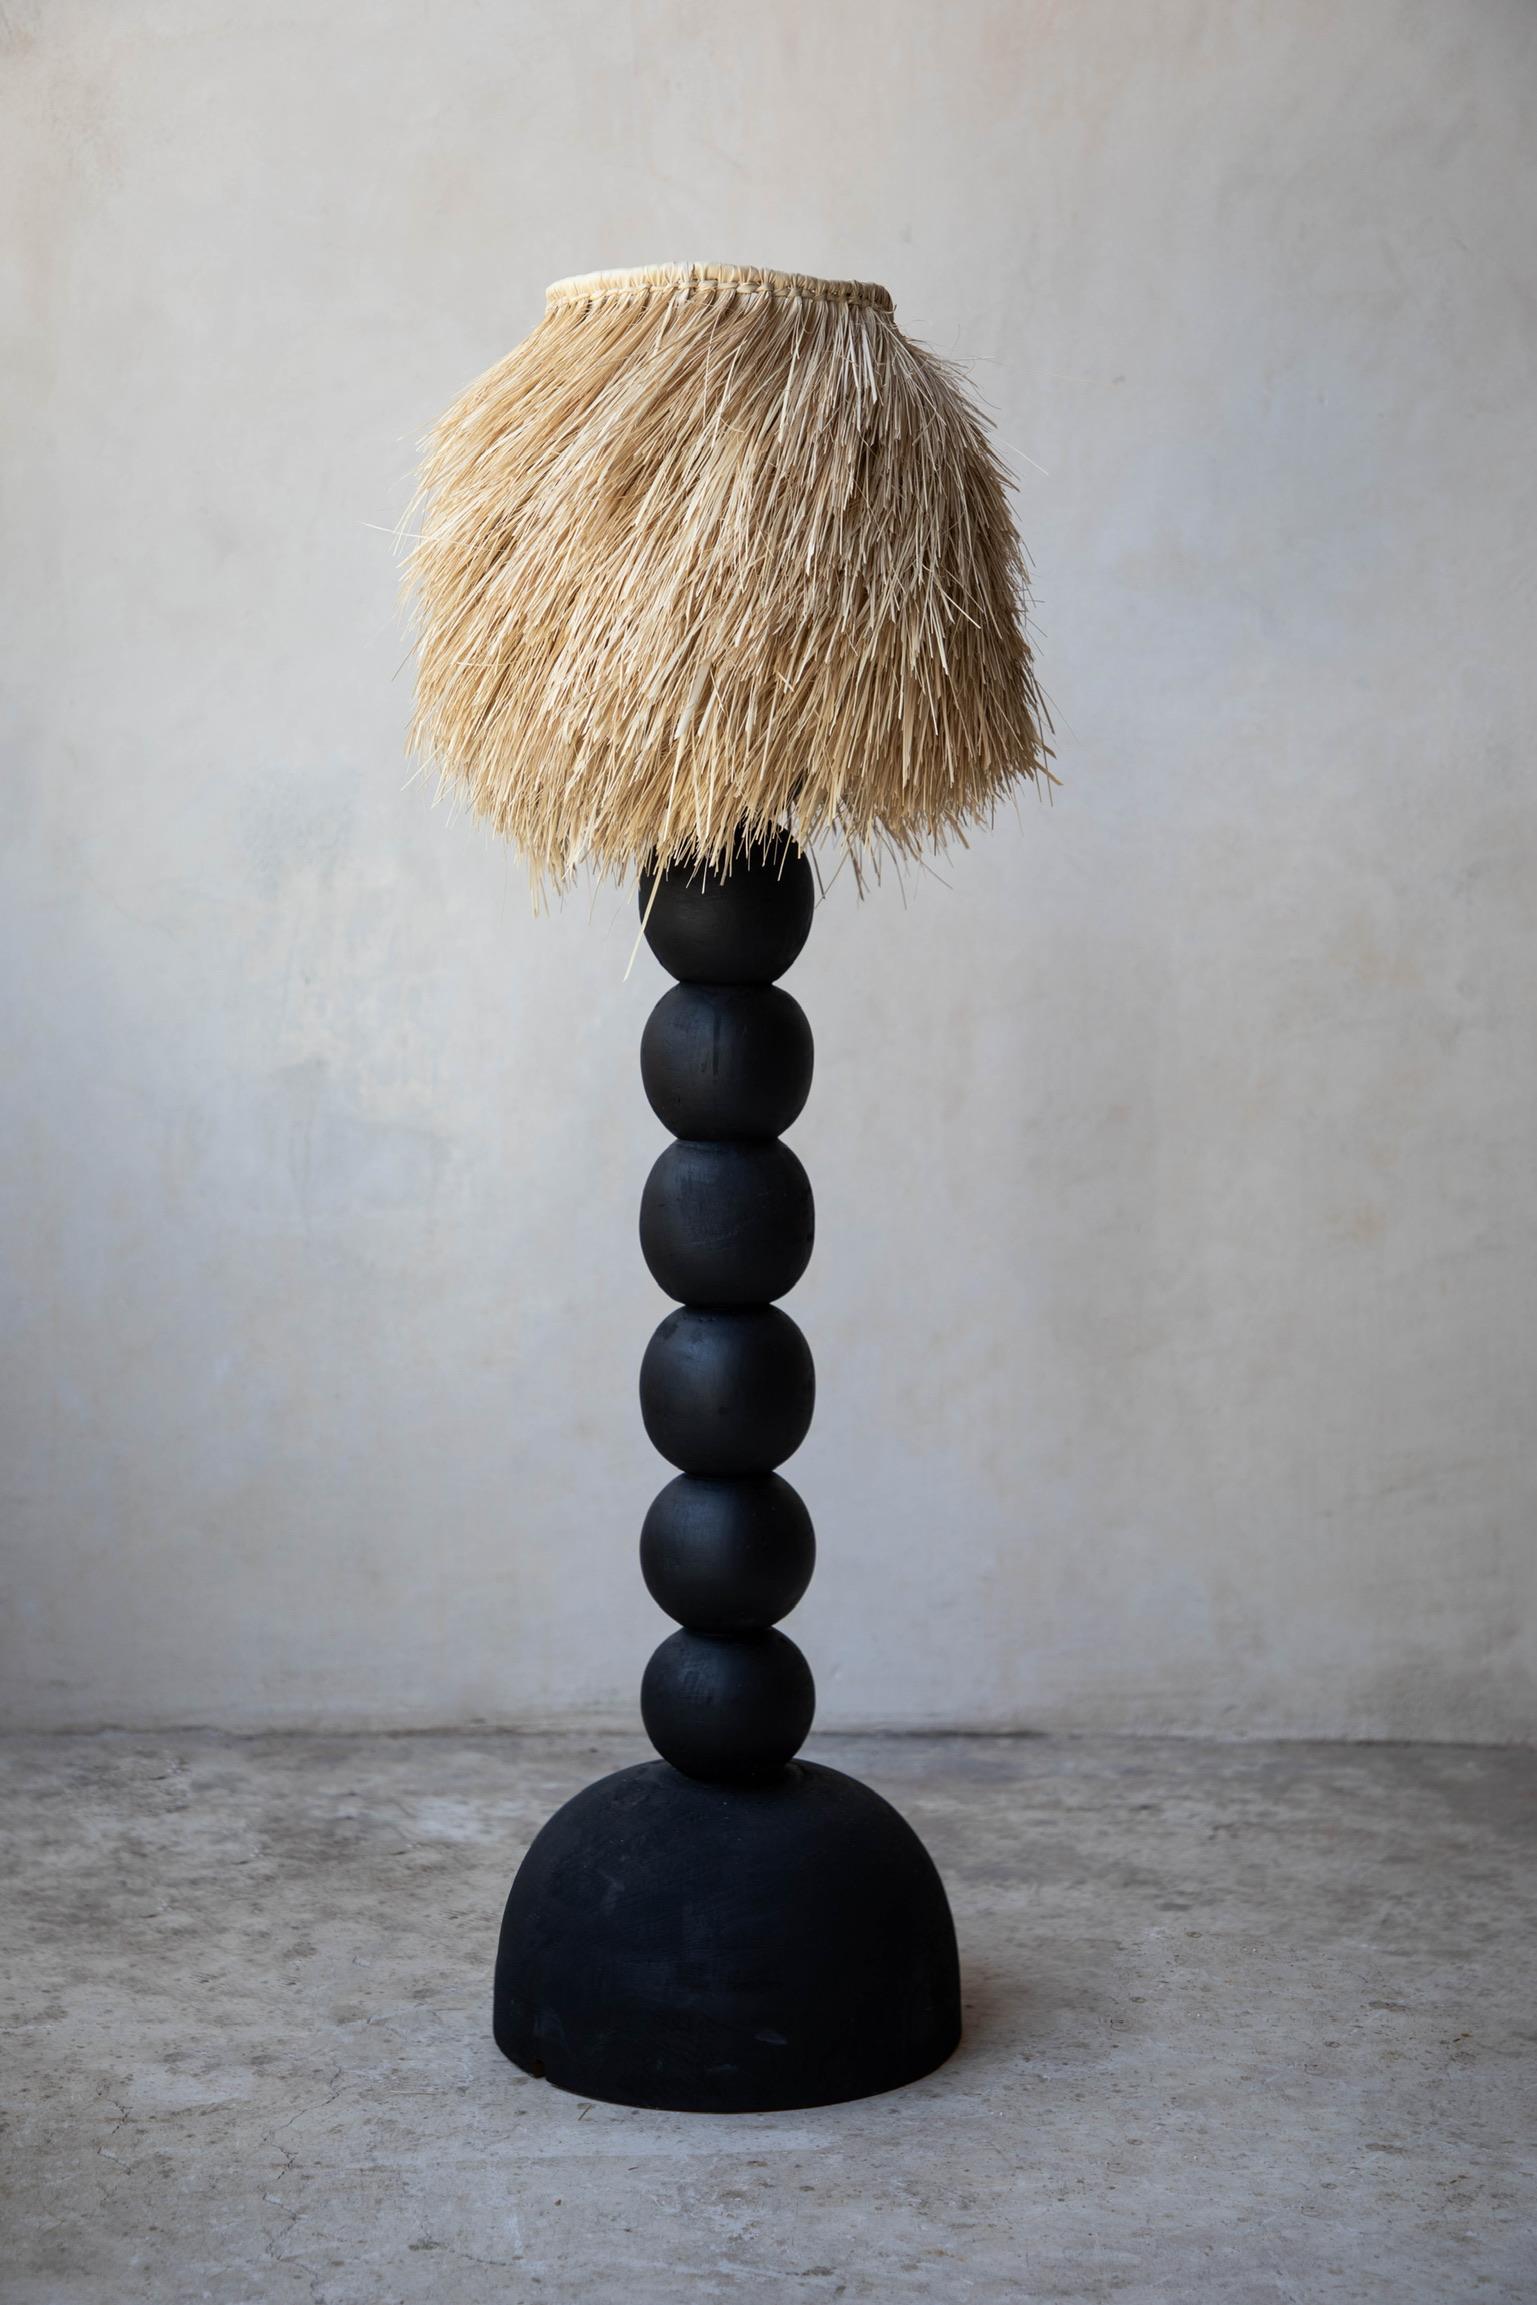 Small black jabin wood floor lamp with palm screen by Daniel Orozco
Material: Jabin wood.
Dimensions: D 30 x H 110 cm
Available in palm or linen lampshade and in natural or black wood finish.
Available in 2 sizes: D 30 x H 110, D 40 x H 160